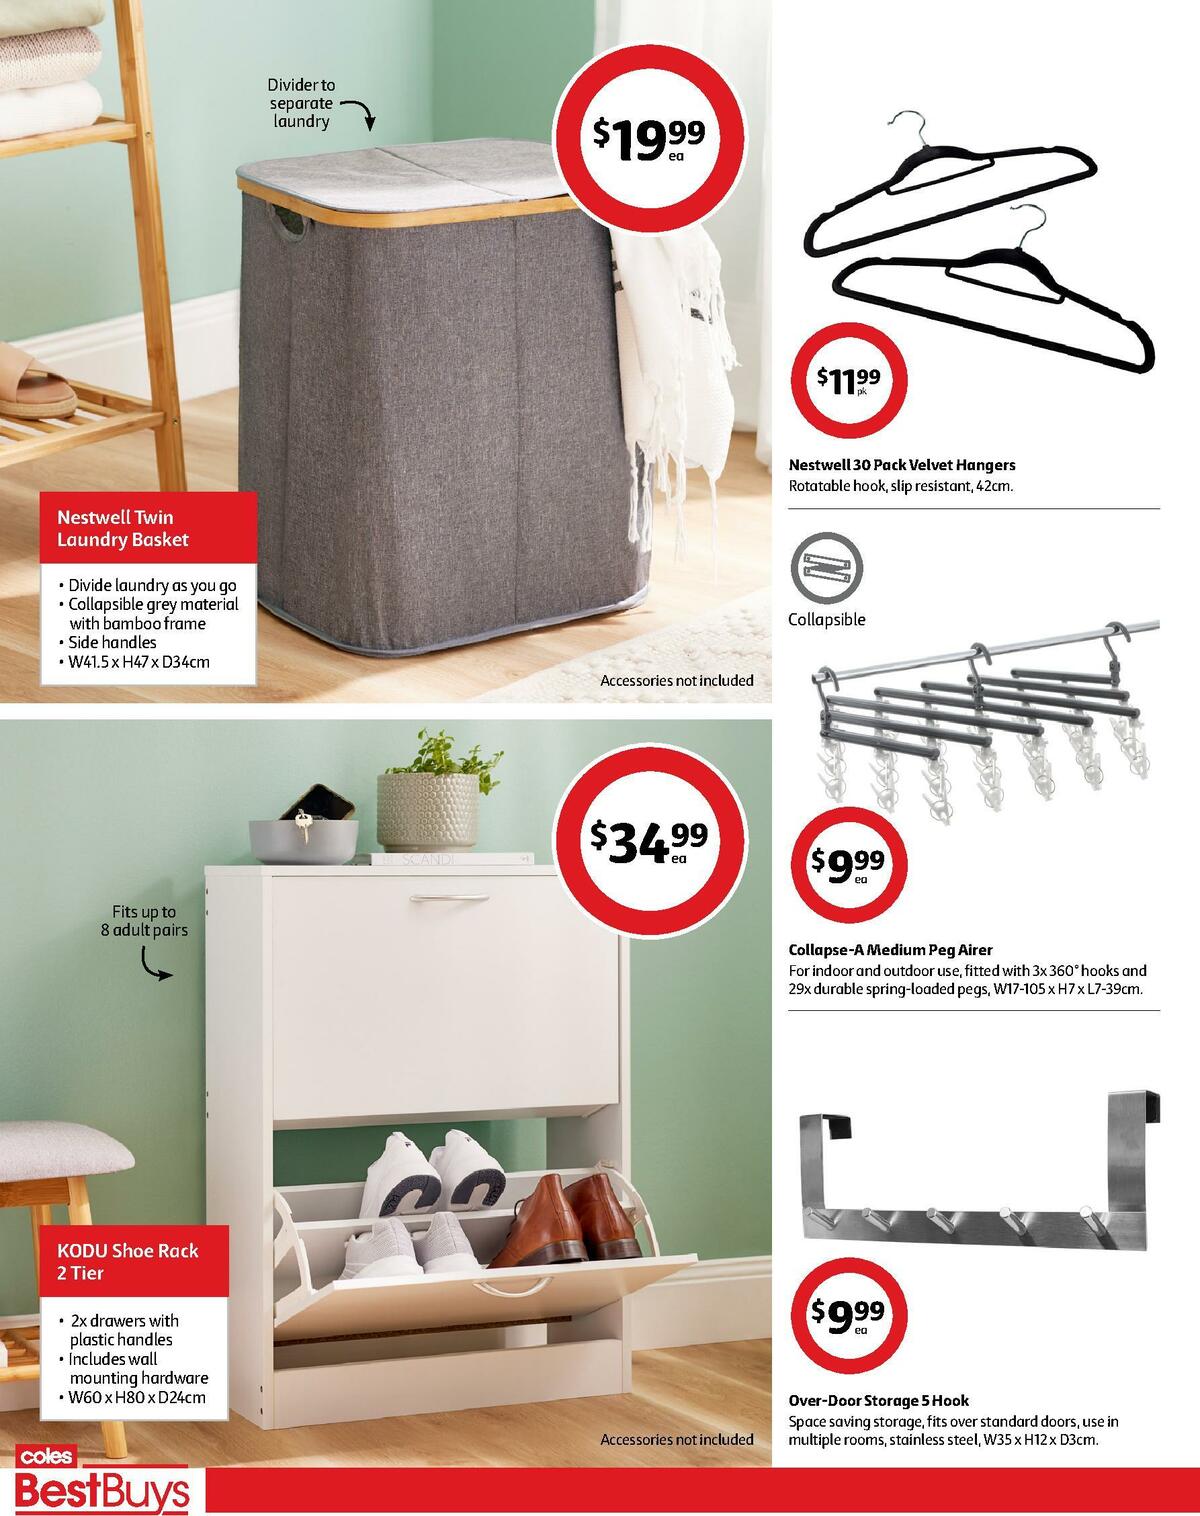 Coles Best Buys - Home Storage Catalogues from 16 September